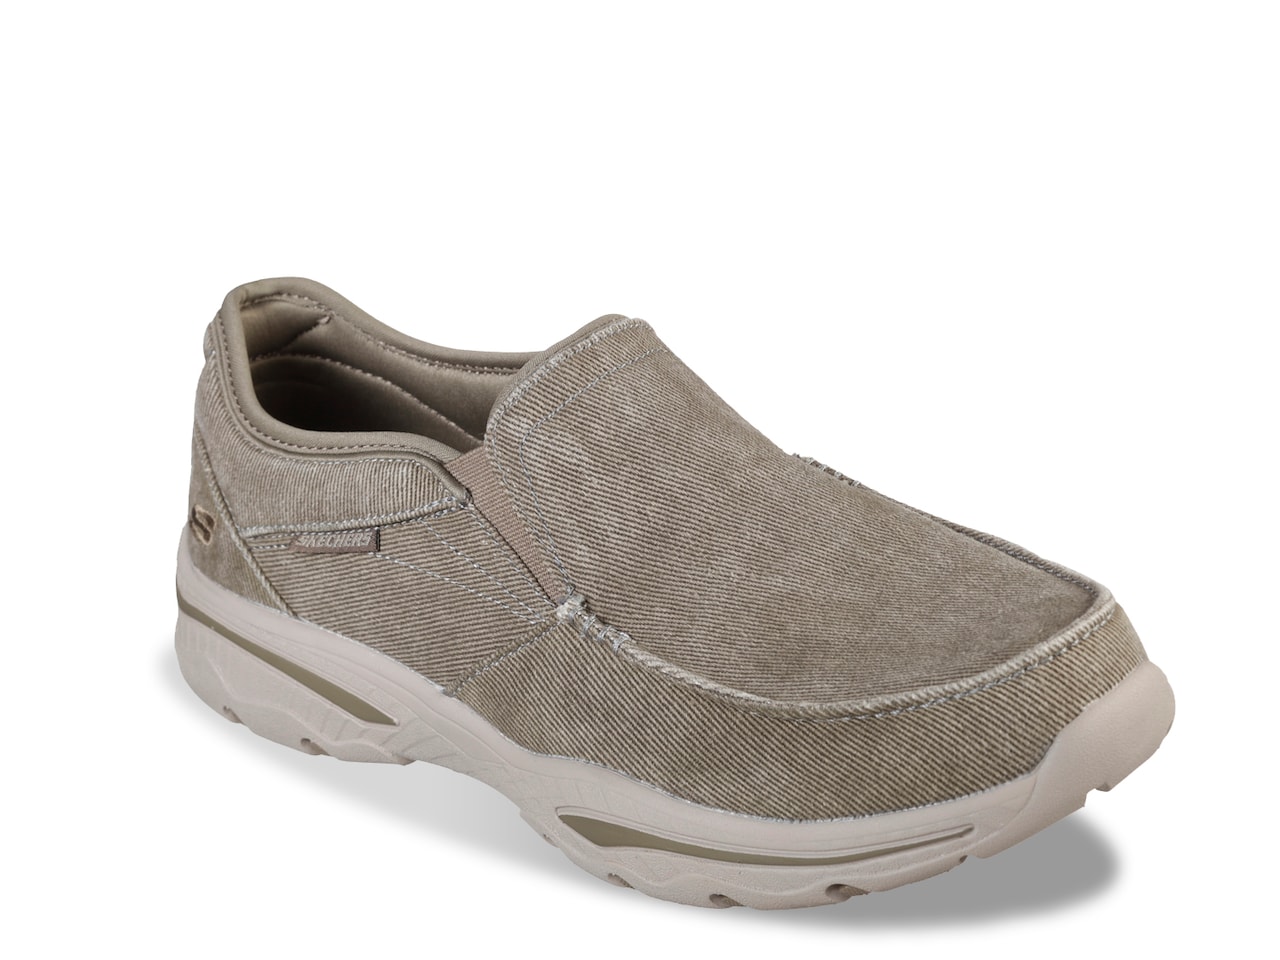 Sketchers Relaxed Fit Creston Moseco Slip-on 